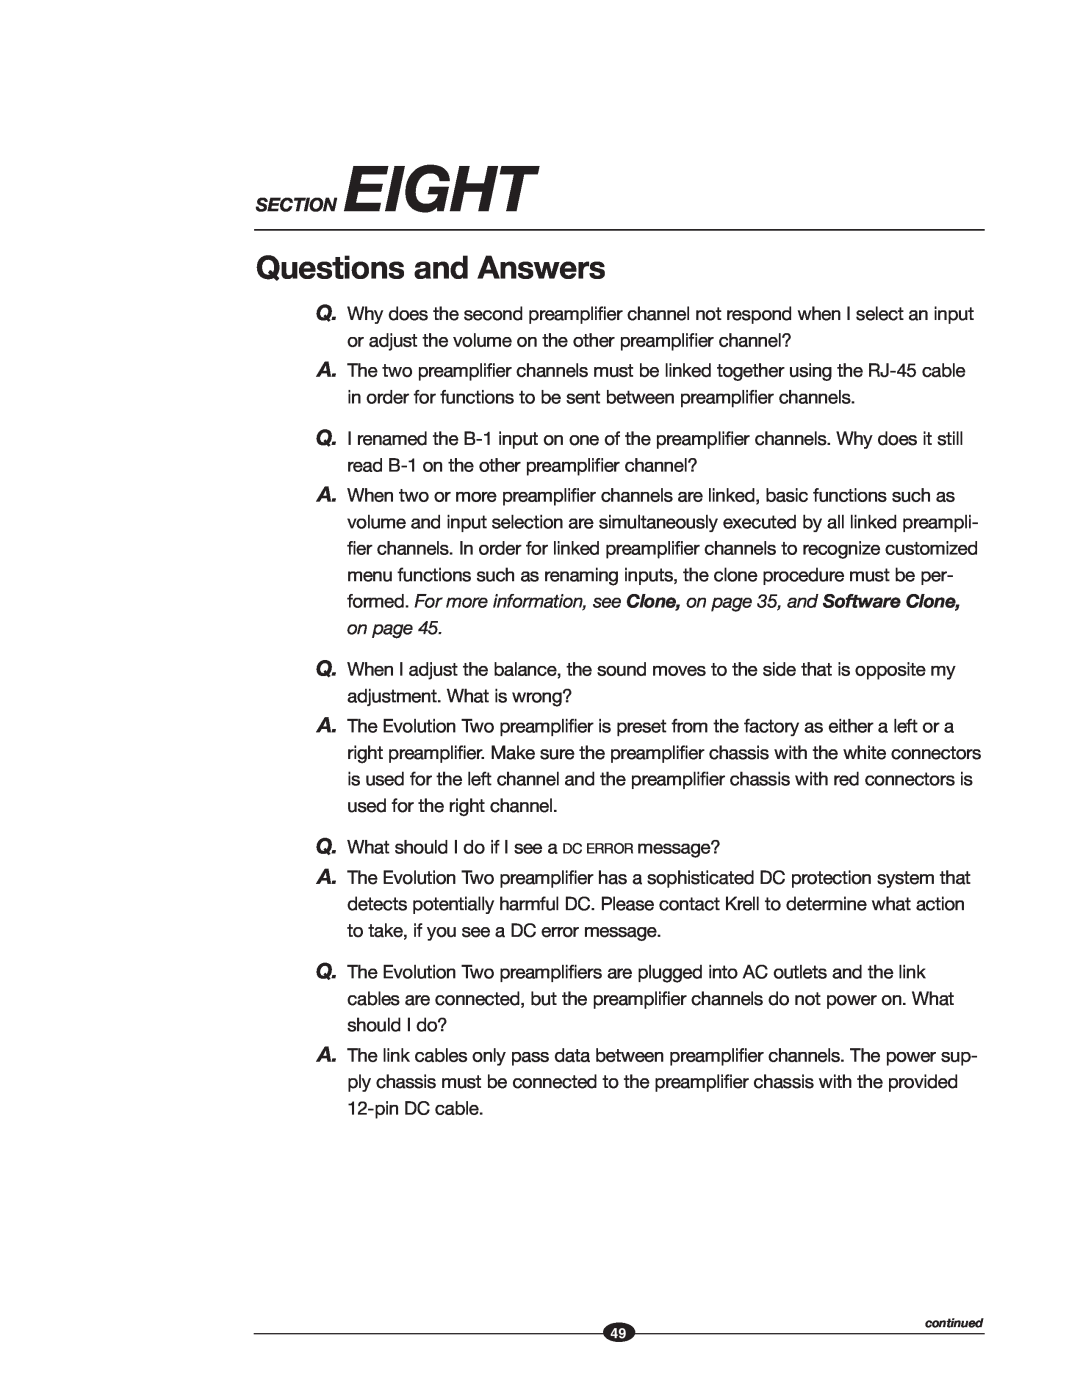 Krell Industries EVOLUTION TWO MONAURAL PREAMPLIFIER manual Questions and Answers, Section Eight 